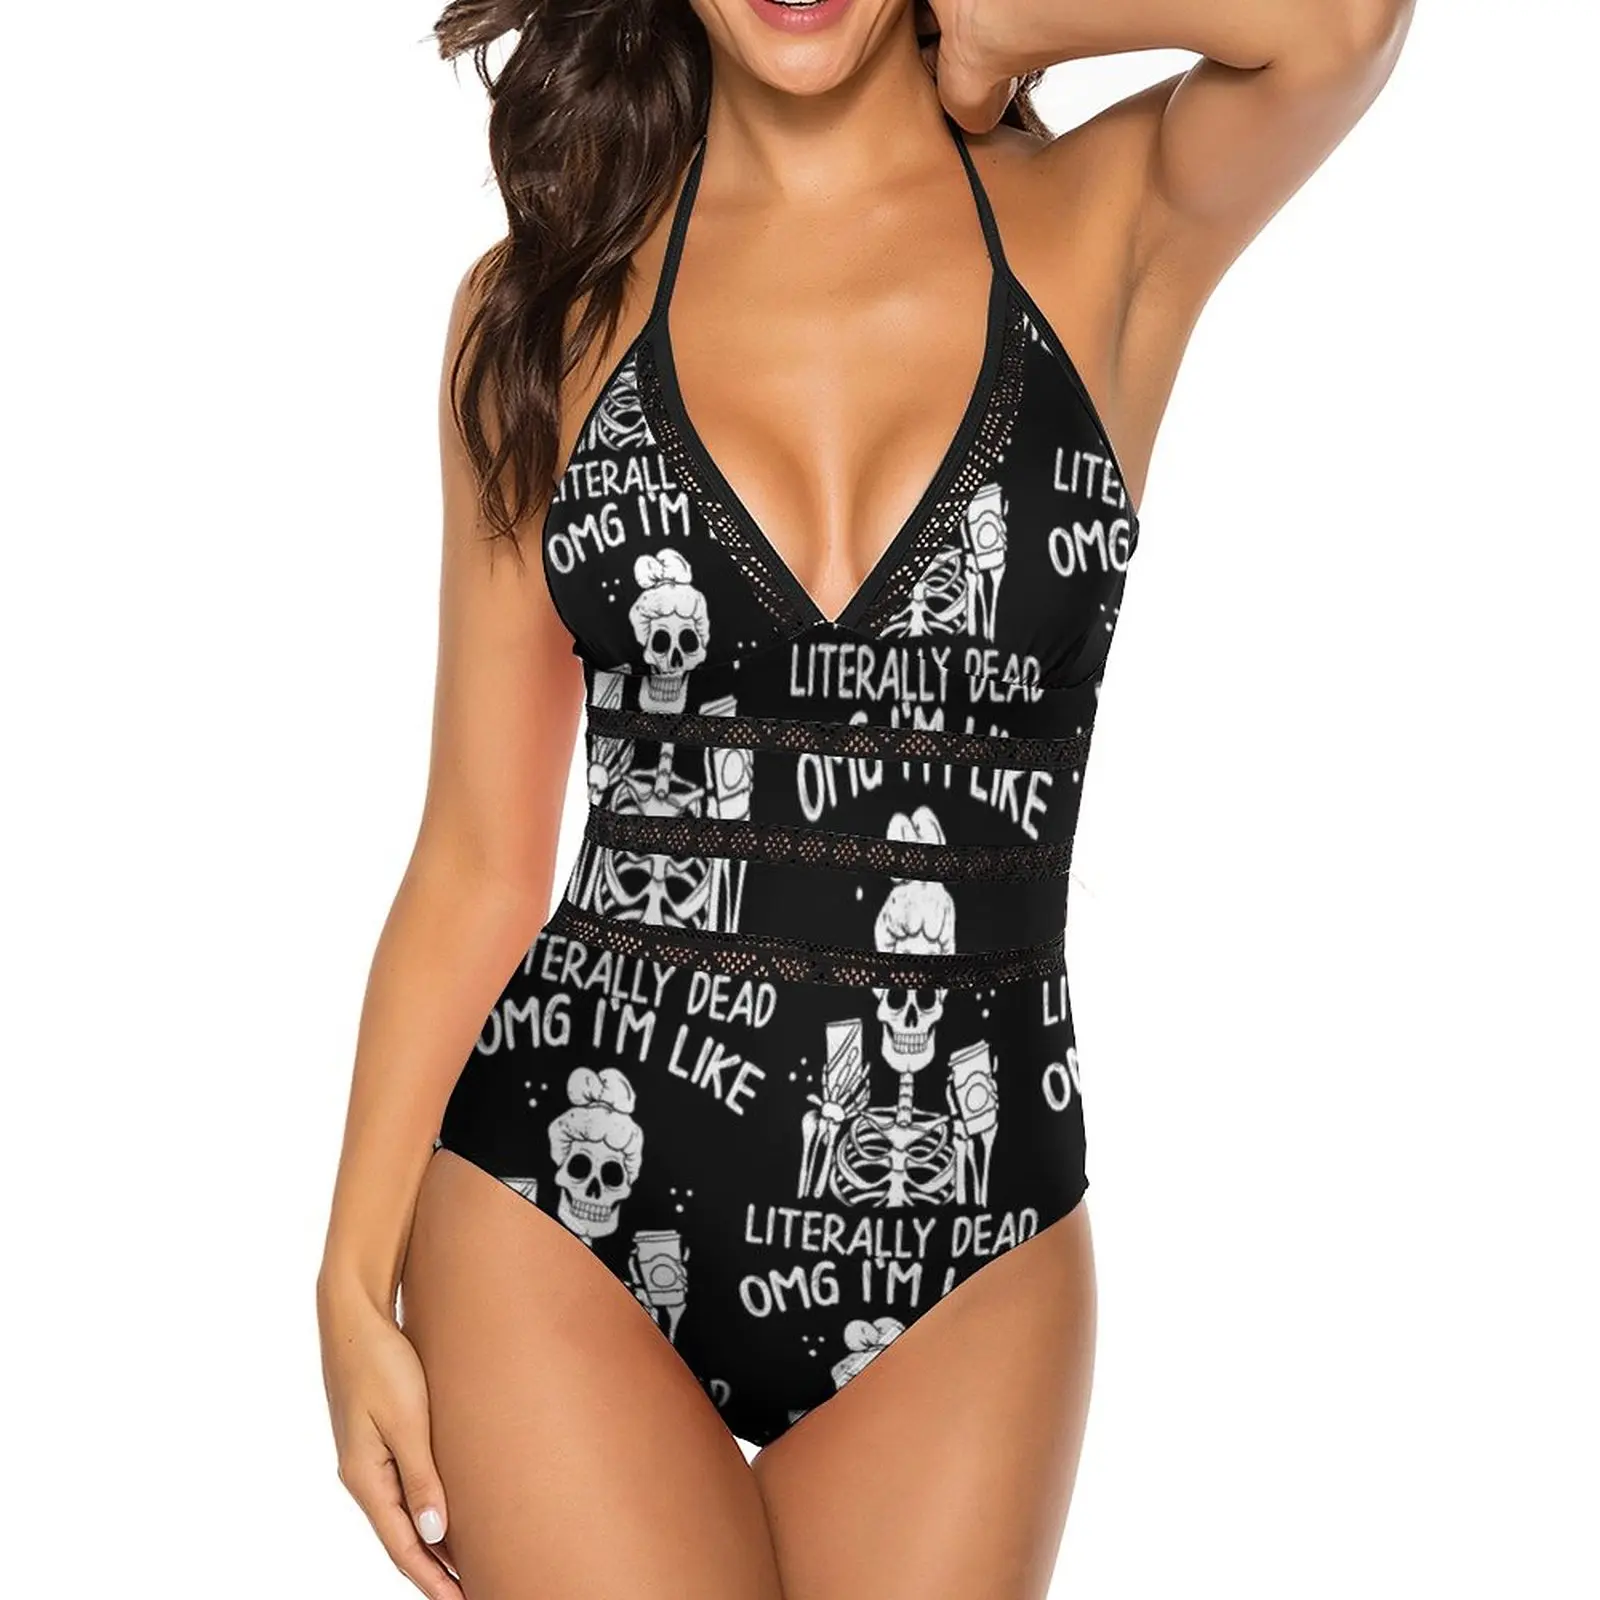 

La Catrina Swimsuit Suspender Corrective Surfing Swimwear Young Cheap Onepiece Bathing Suit